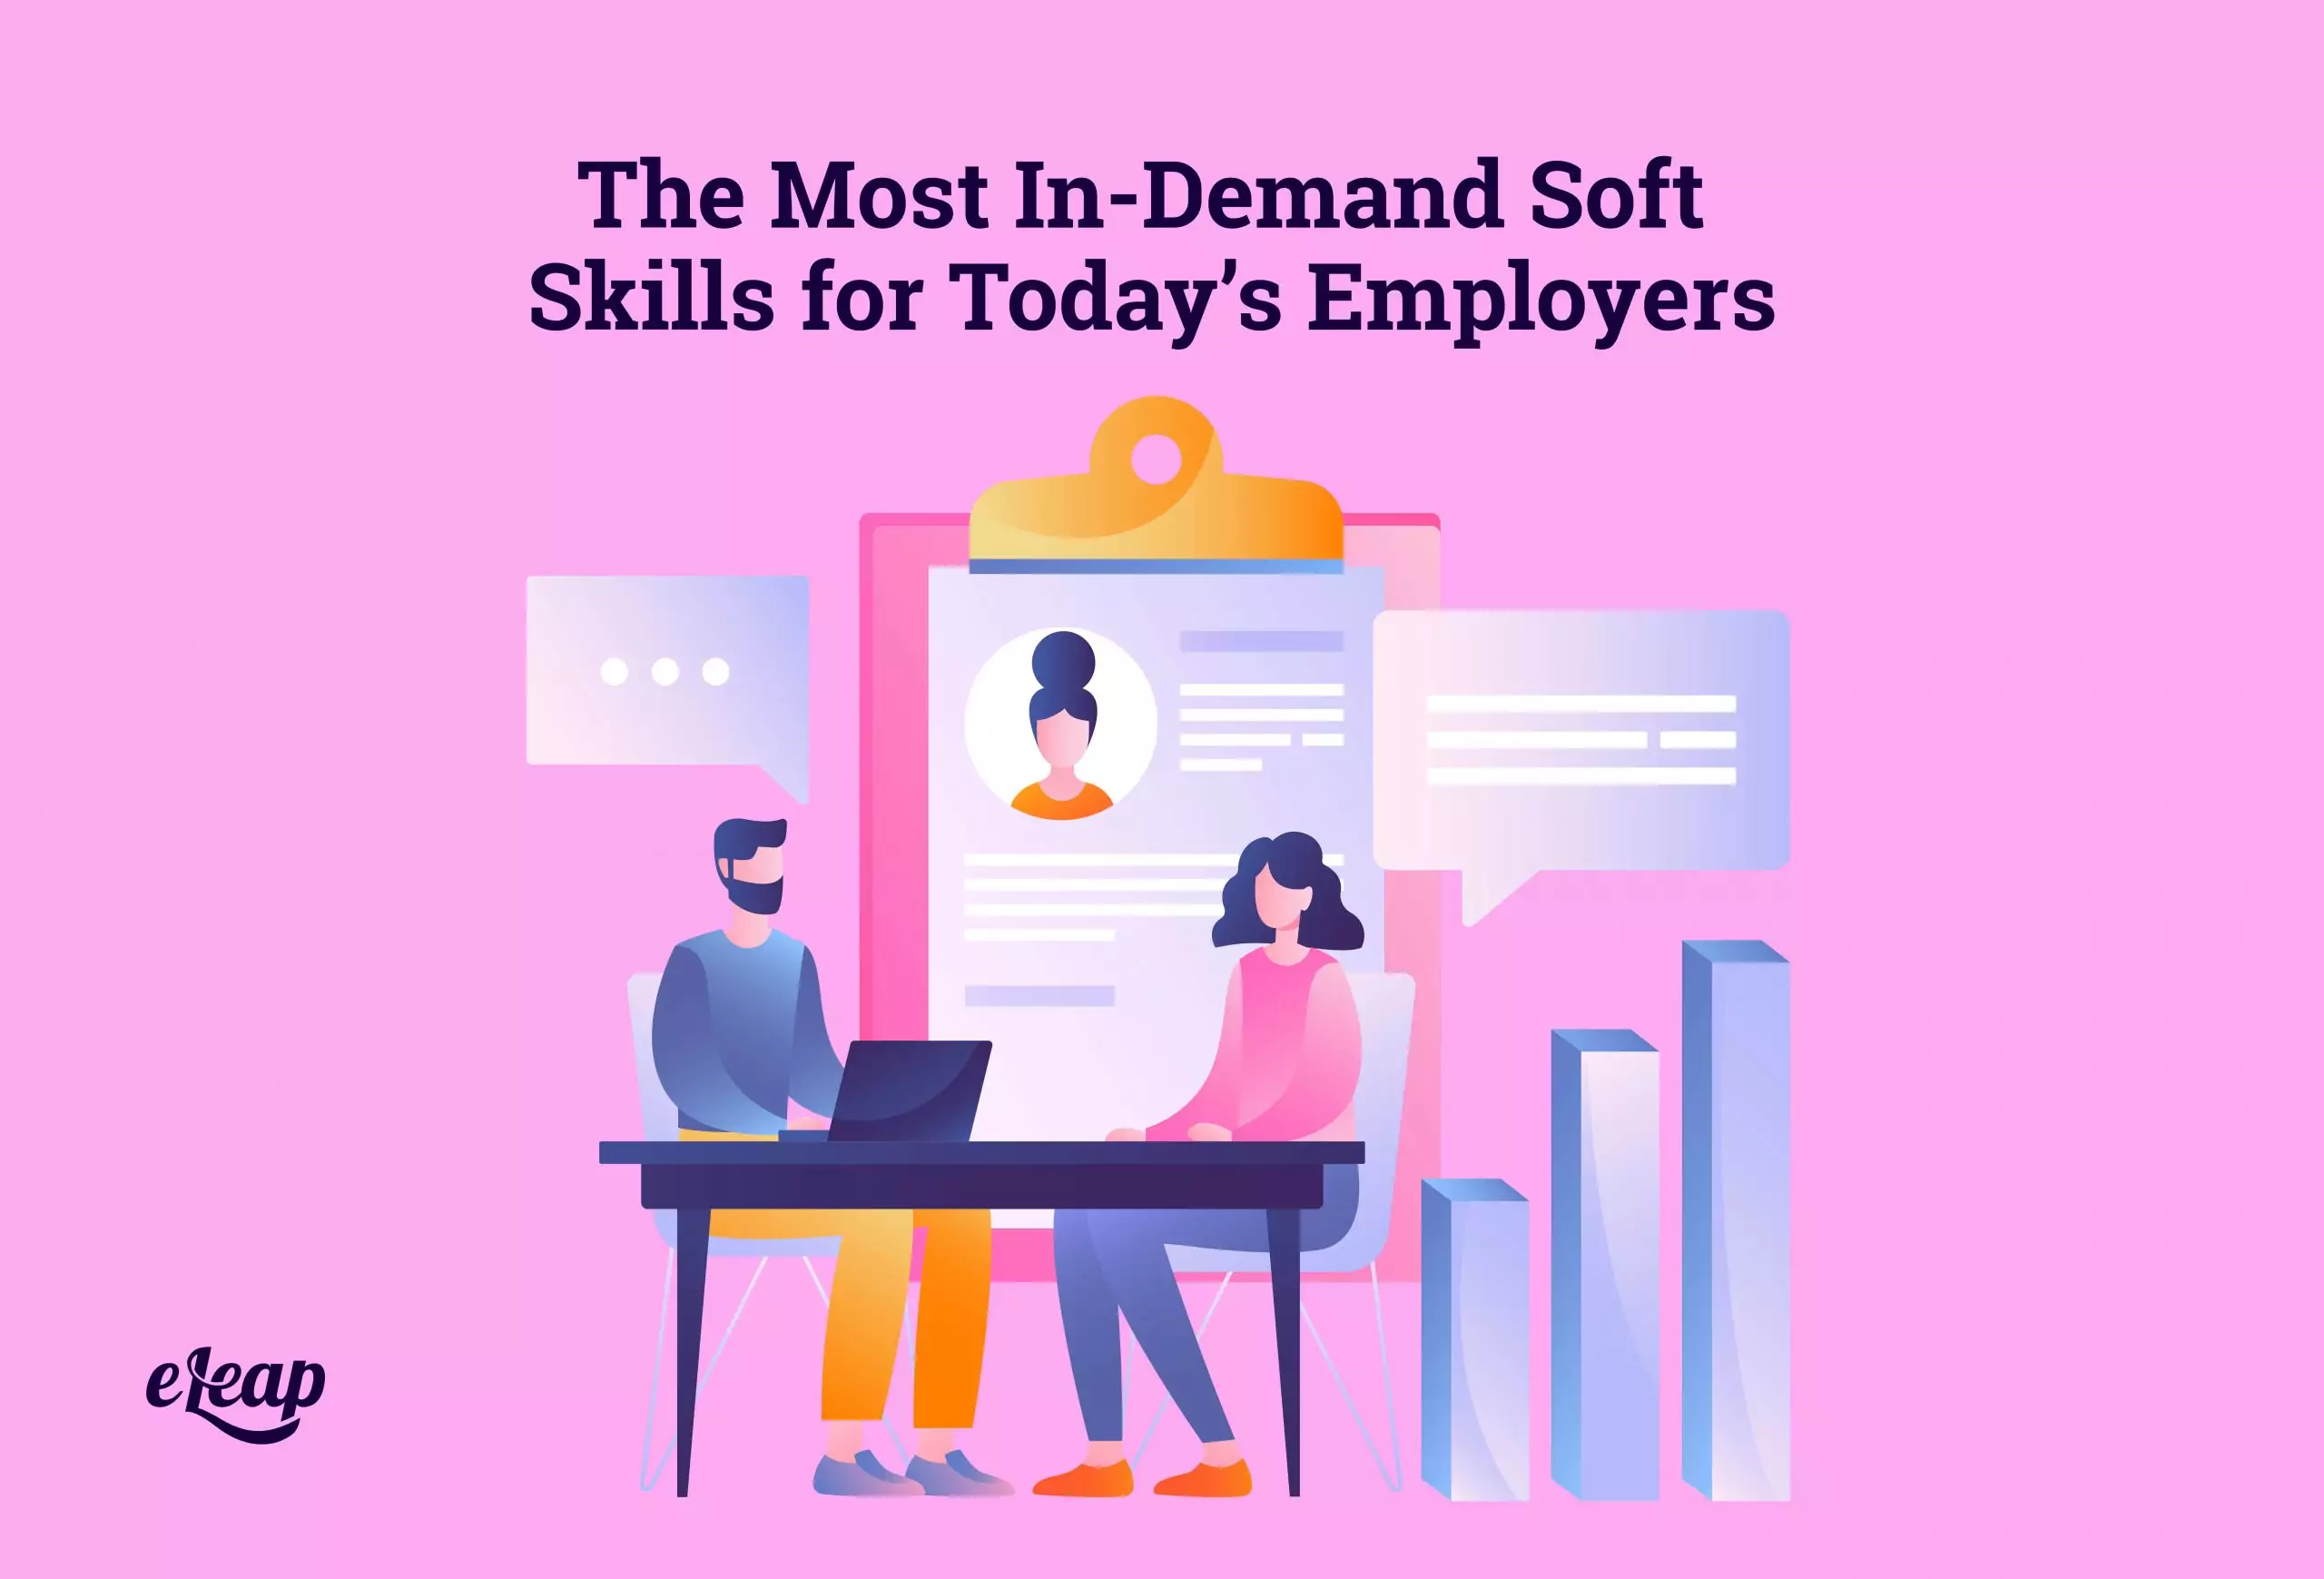 The Most In-Demand Soft Skills for Today’s Employers